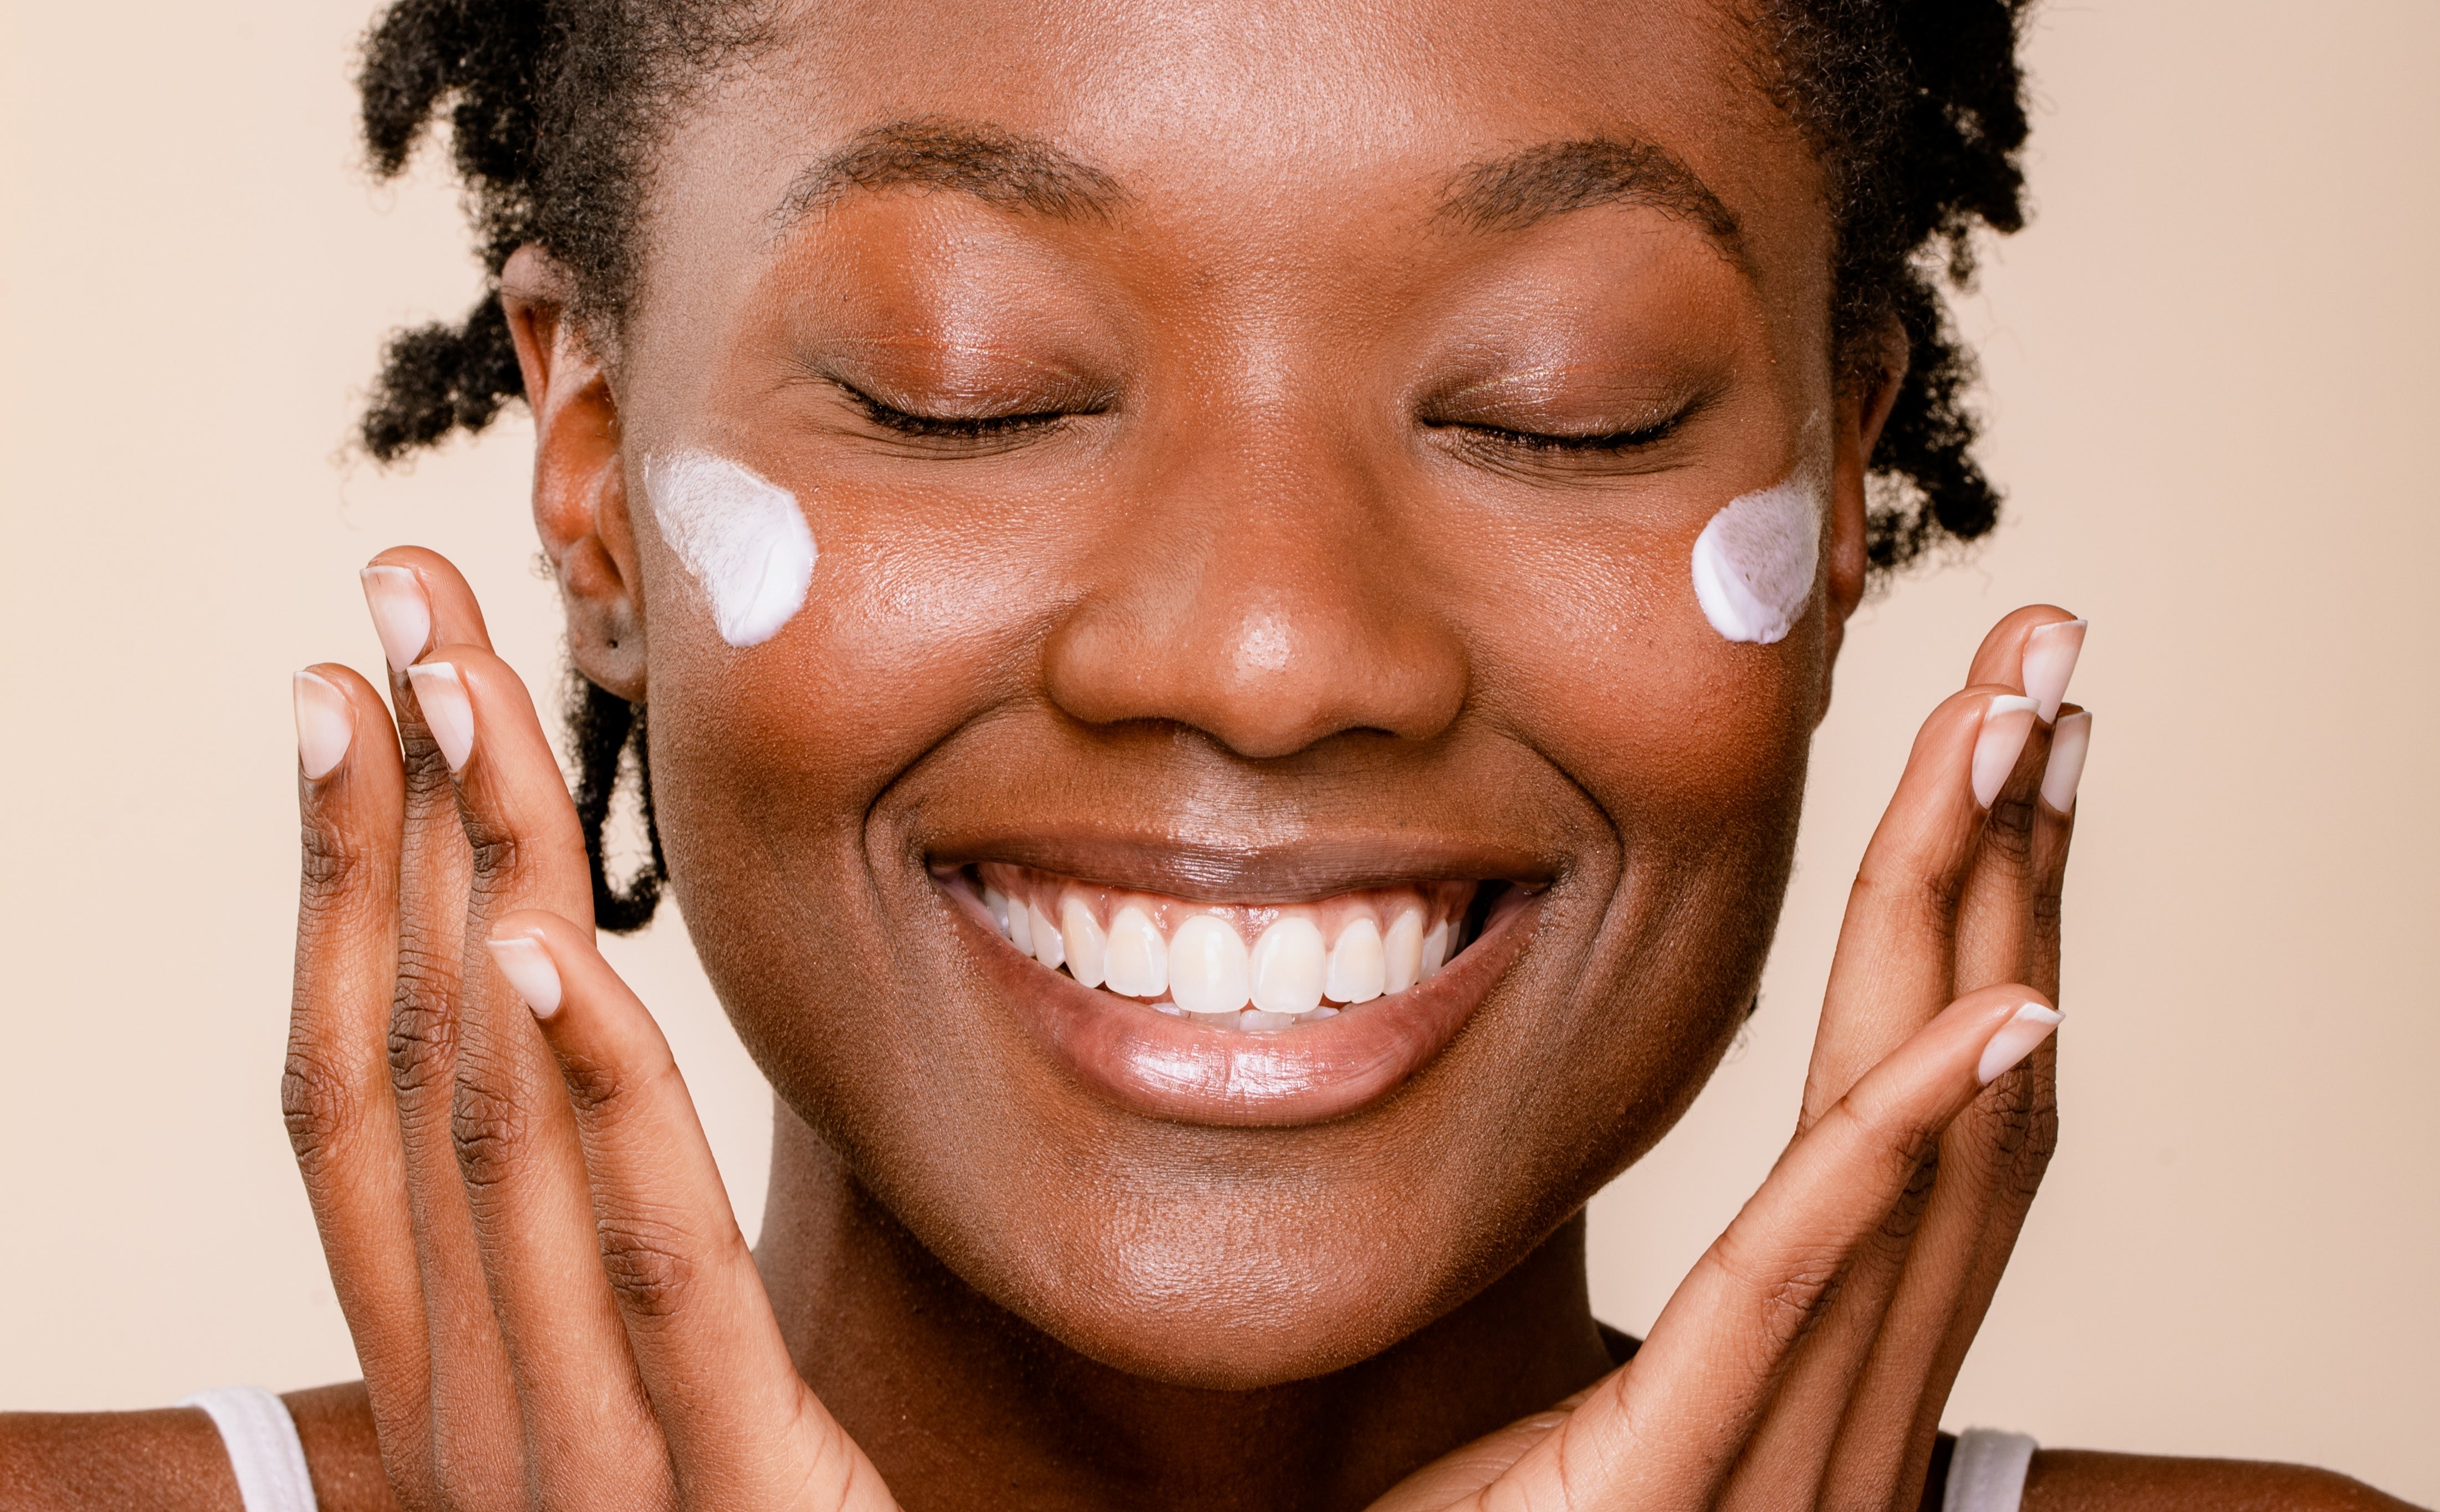 Dry vs. Dehydrated Skin: What's the Difference?